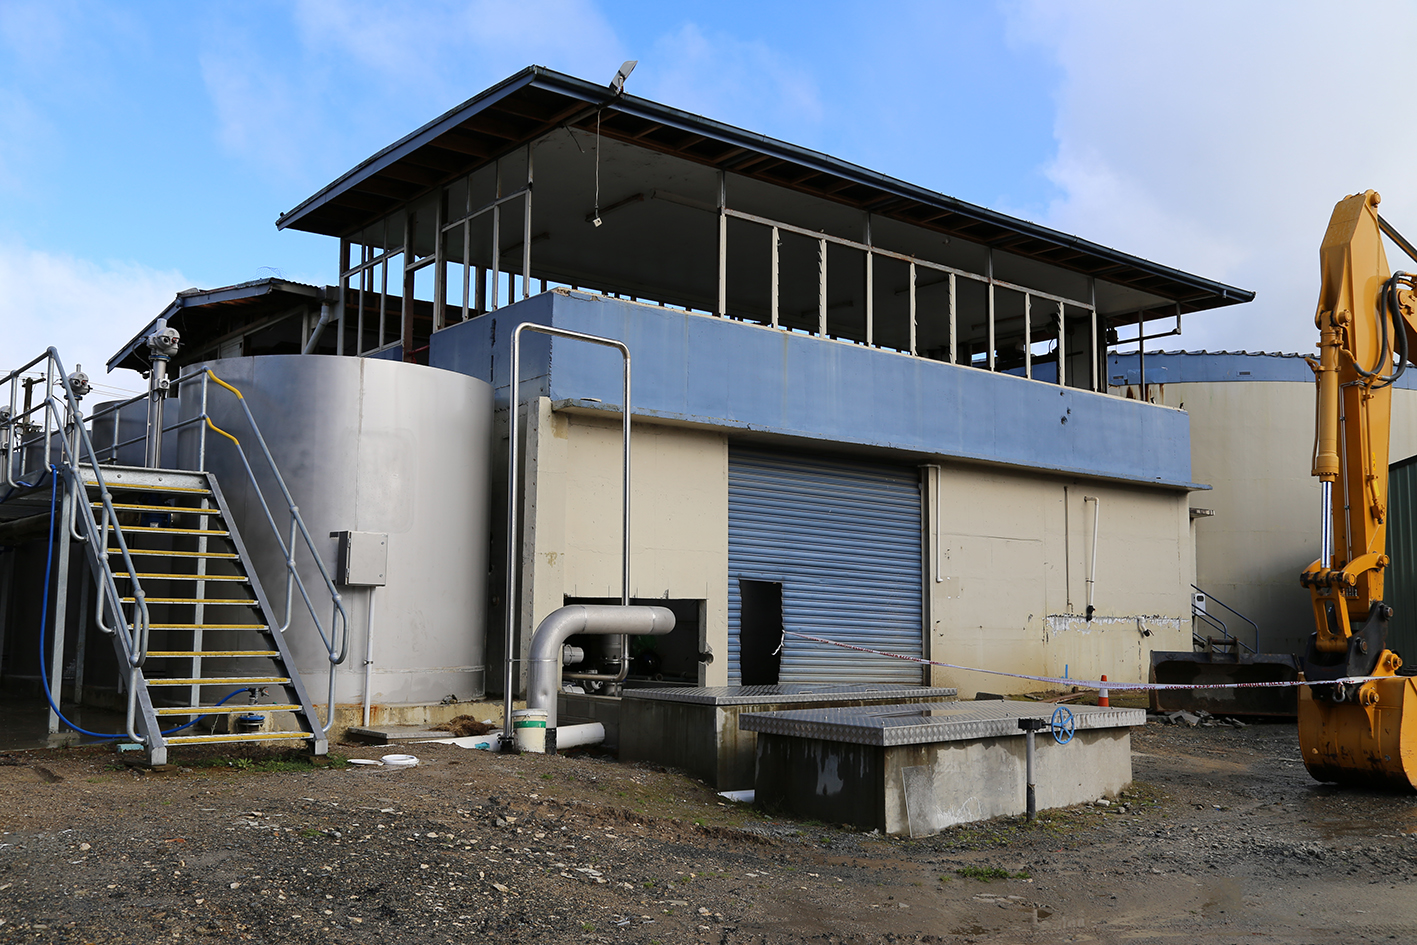 Demolition of the old Te Kuiti Water Treatment Plant Building - August 2017